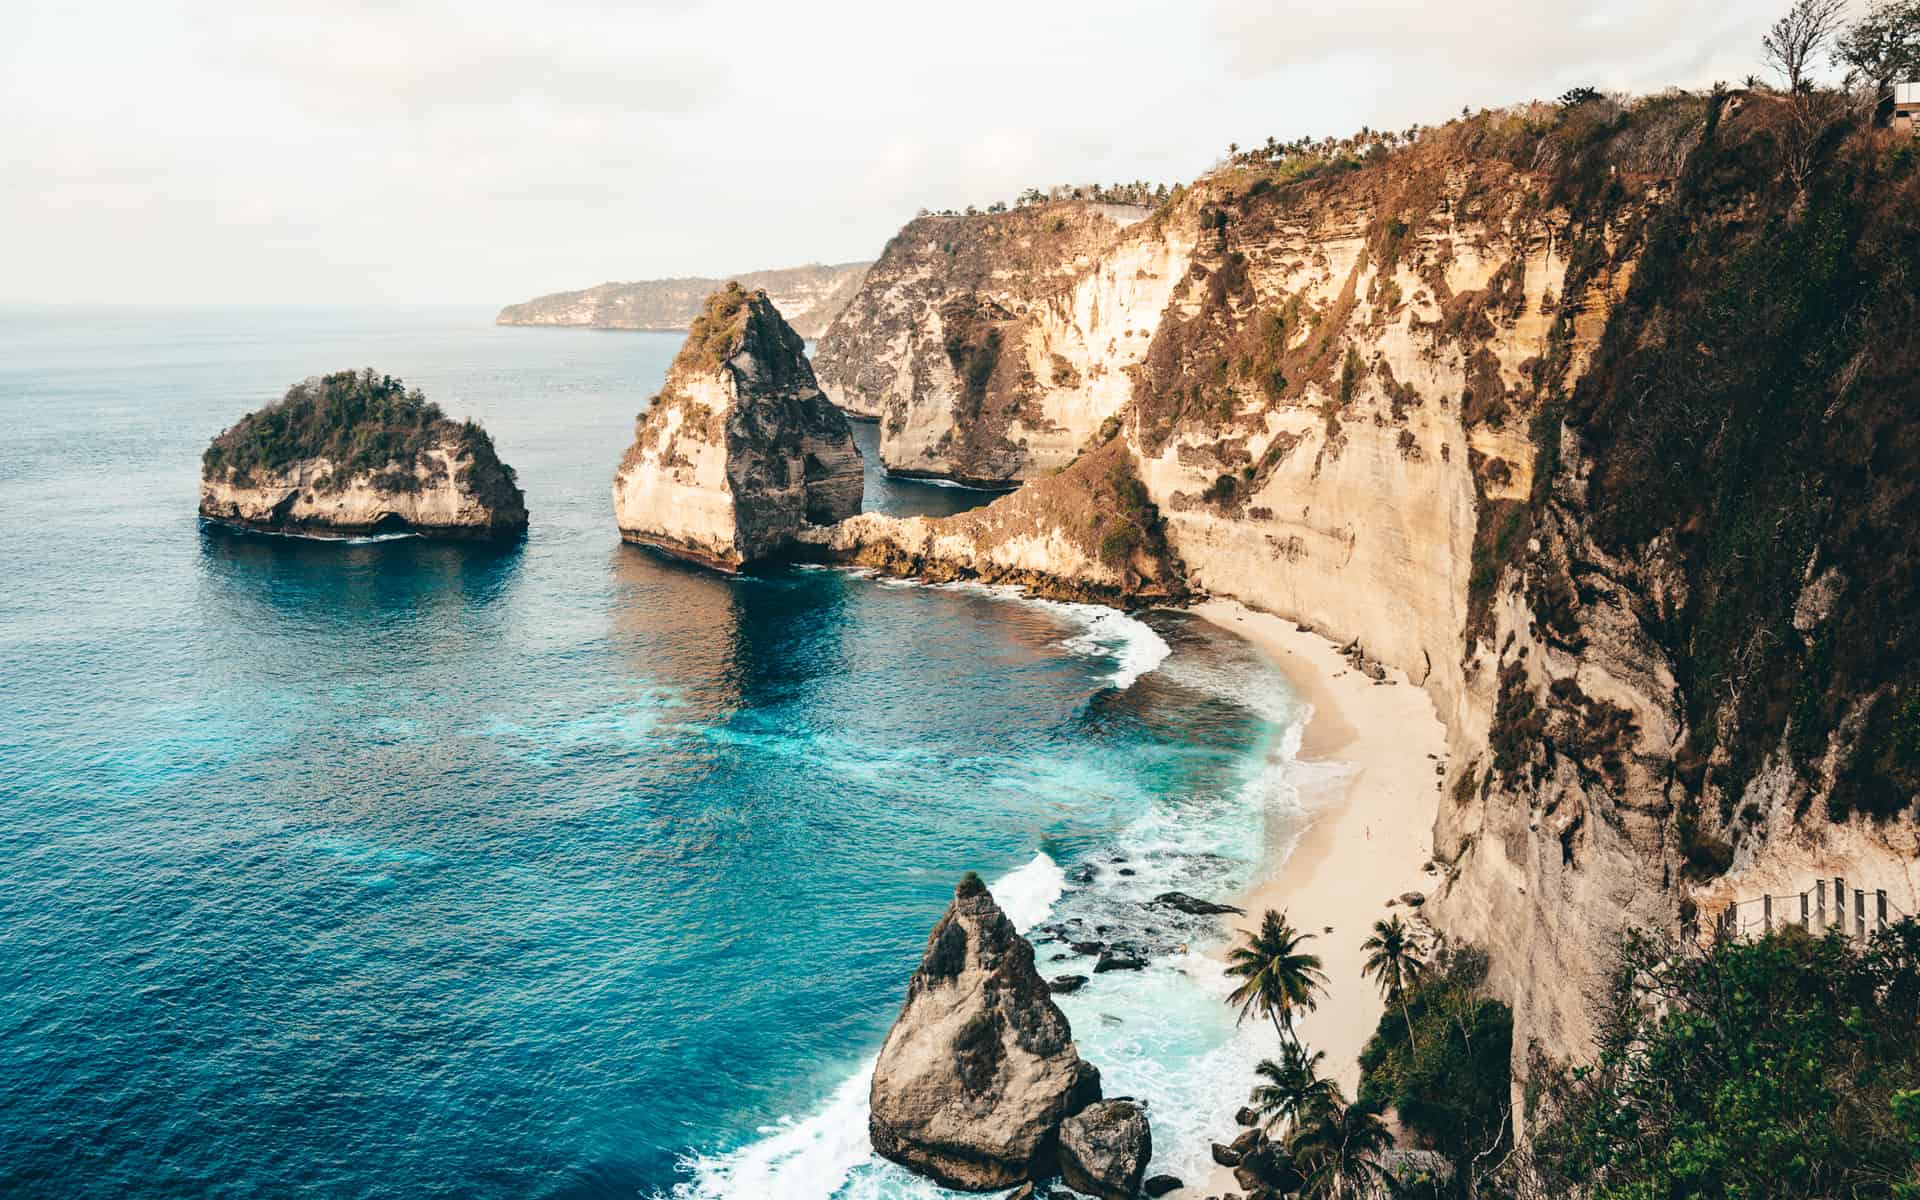 Diamond Beach and the surrounding rock formations in Nusa Penida